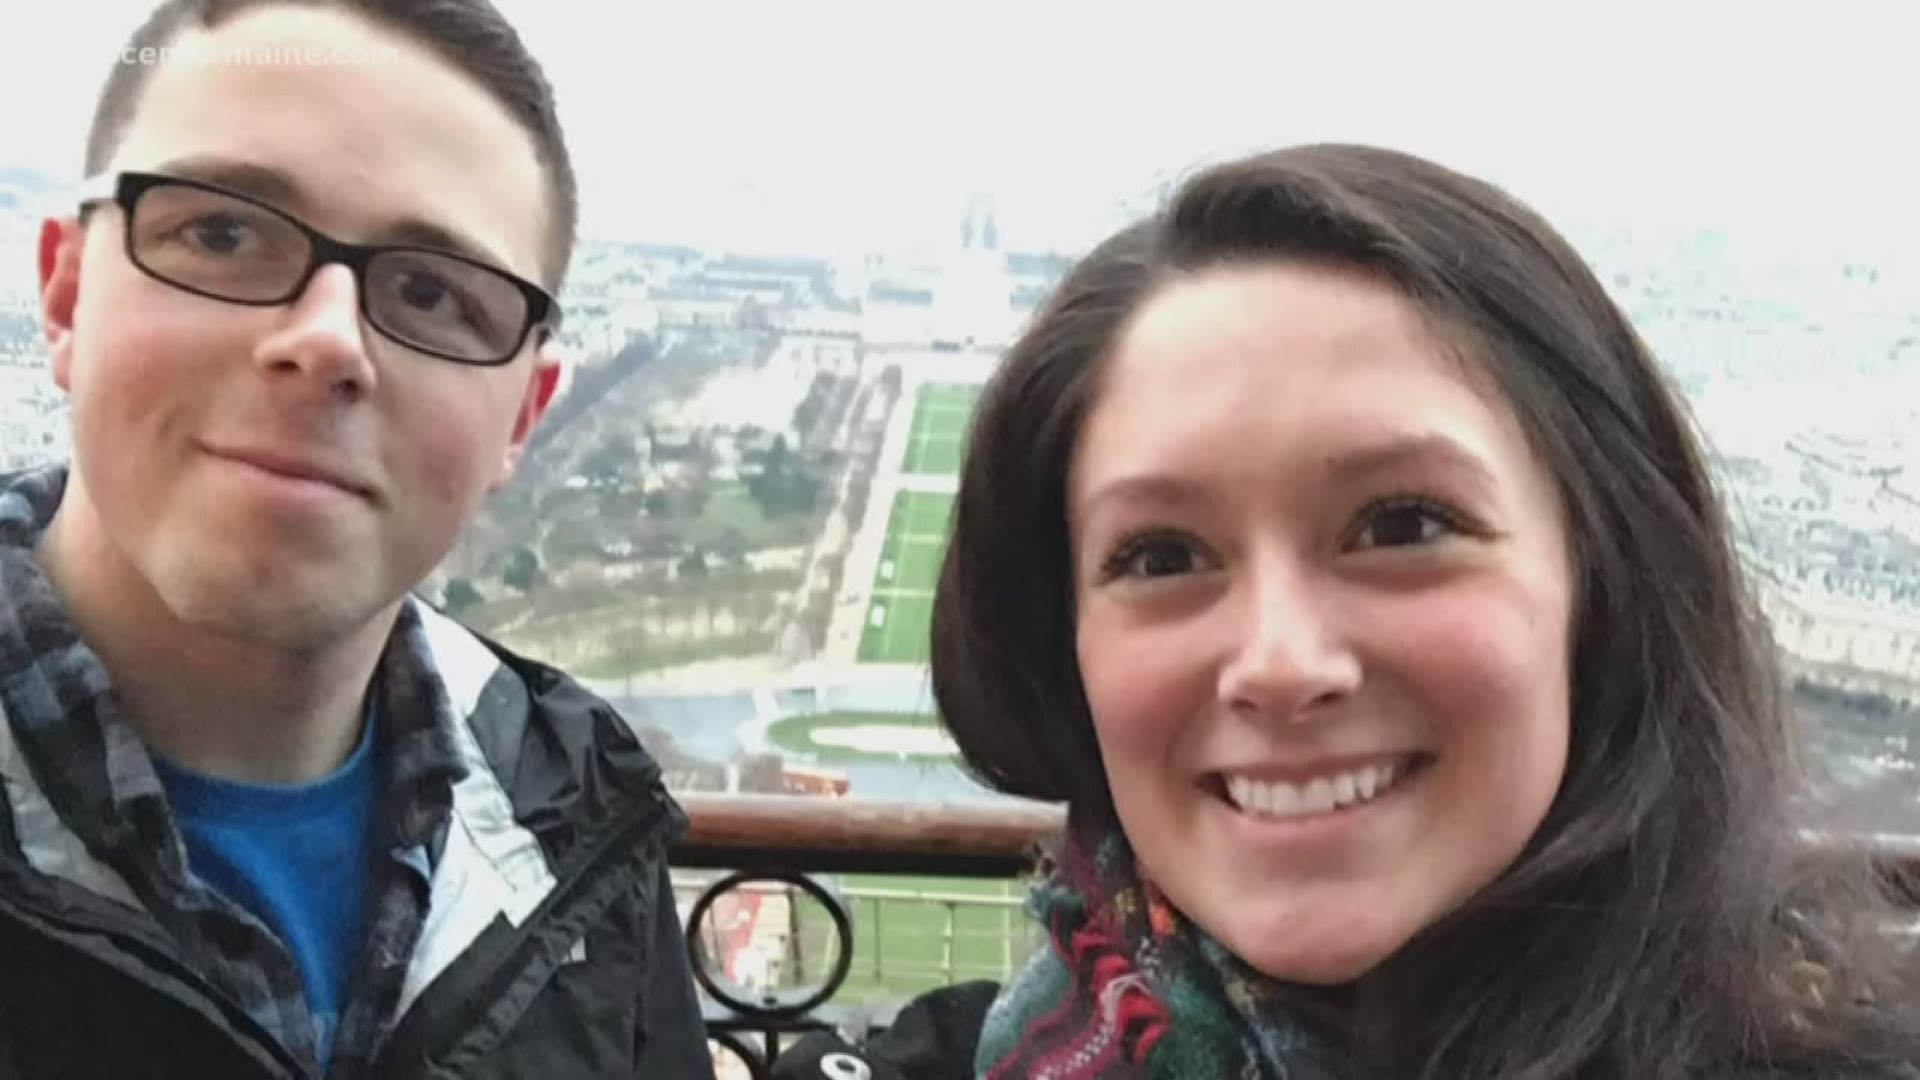 Sarah Terrano is still coming to grips with the death of her boyfriend, U.S. Airman and Westbrook native Shawn McKeough, after he was murdered at an Arkansas convenience store.